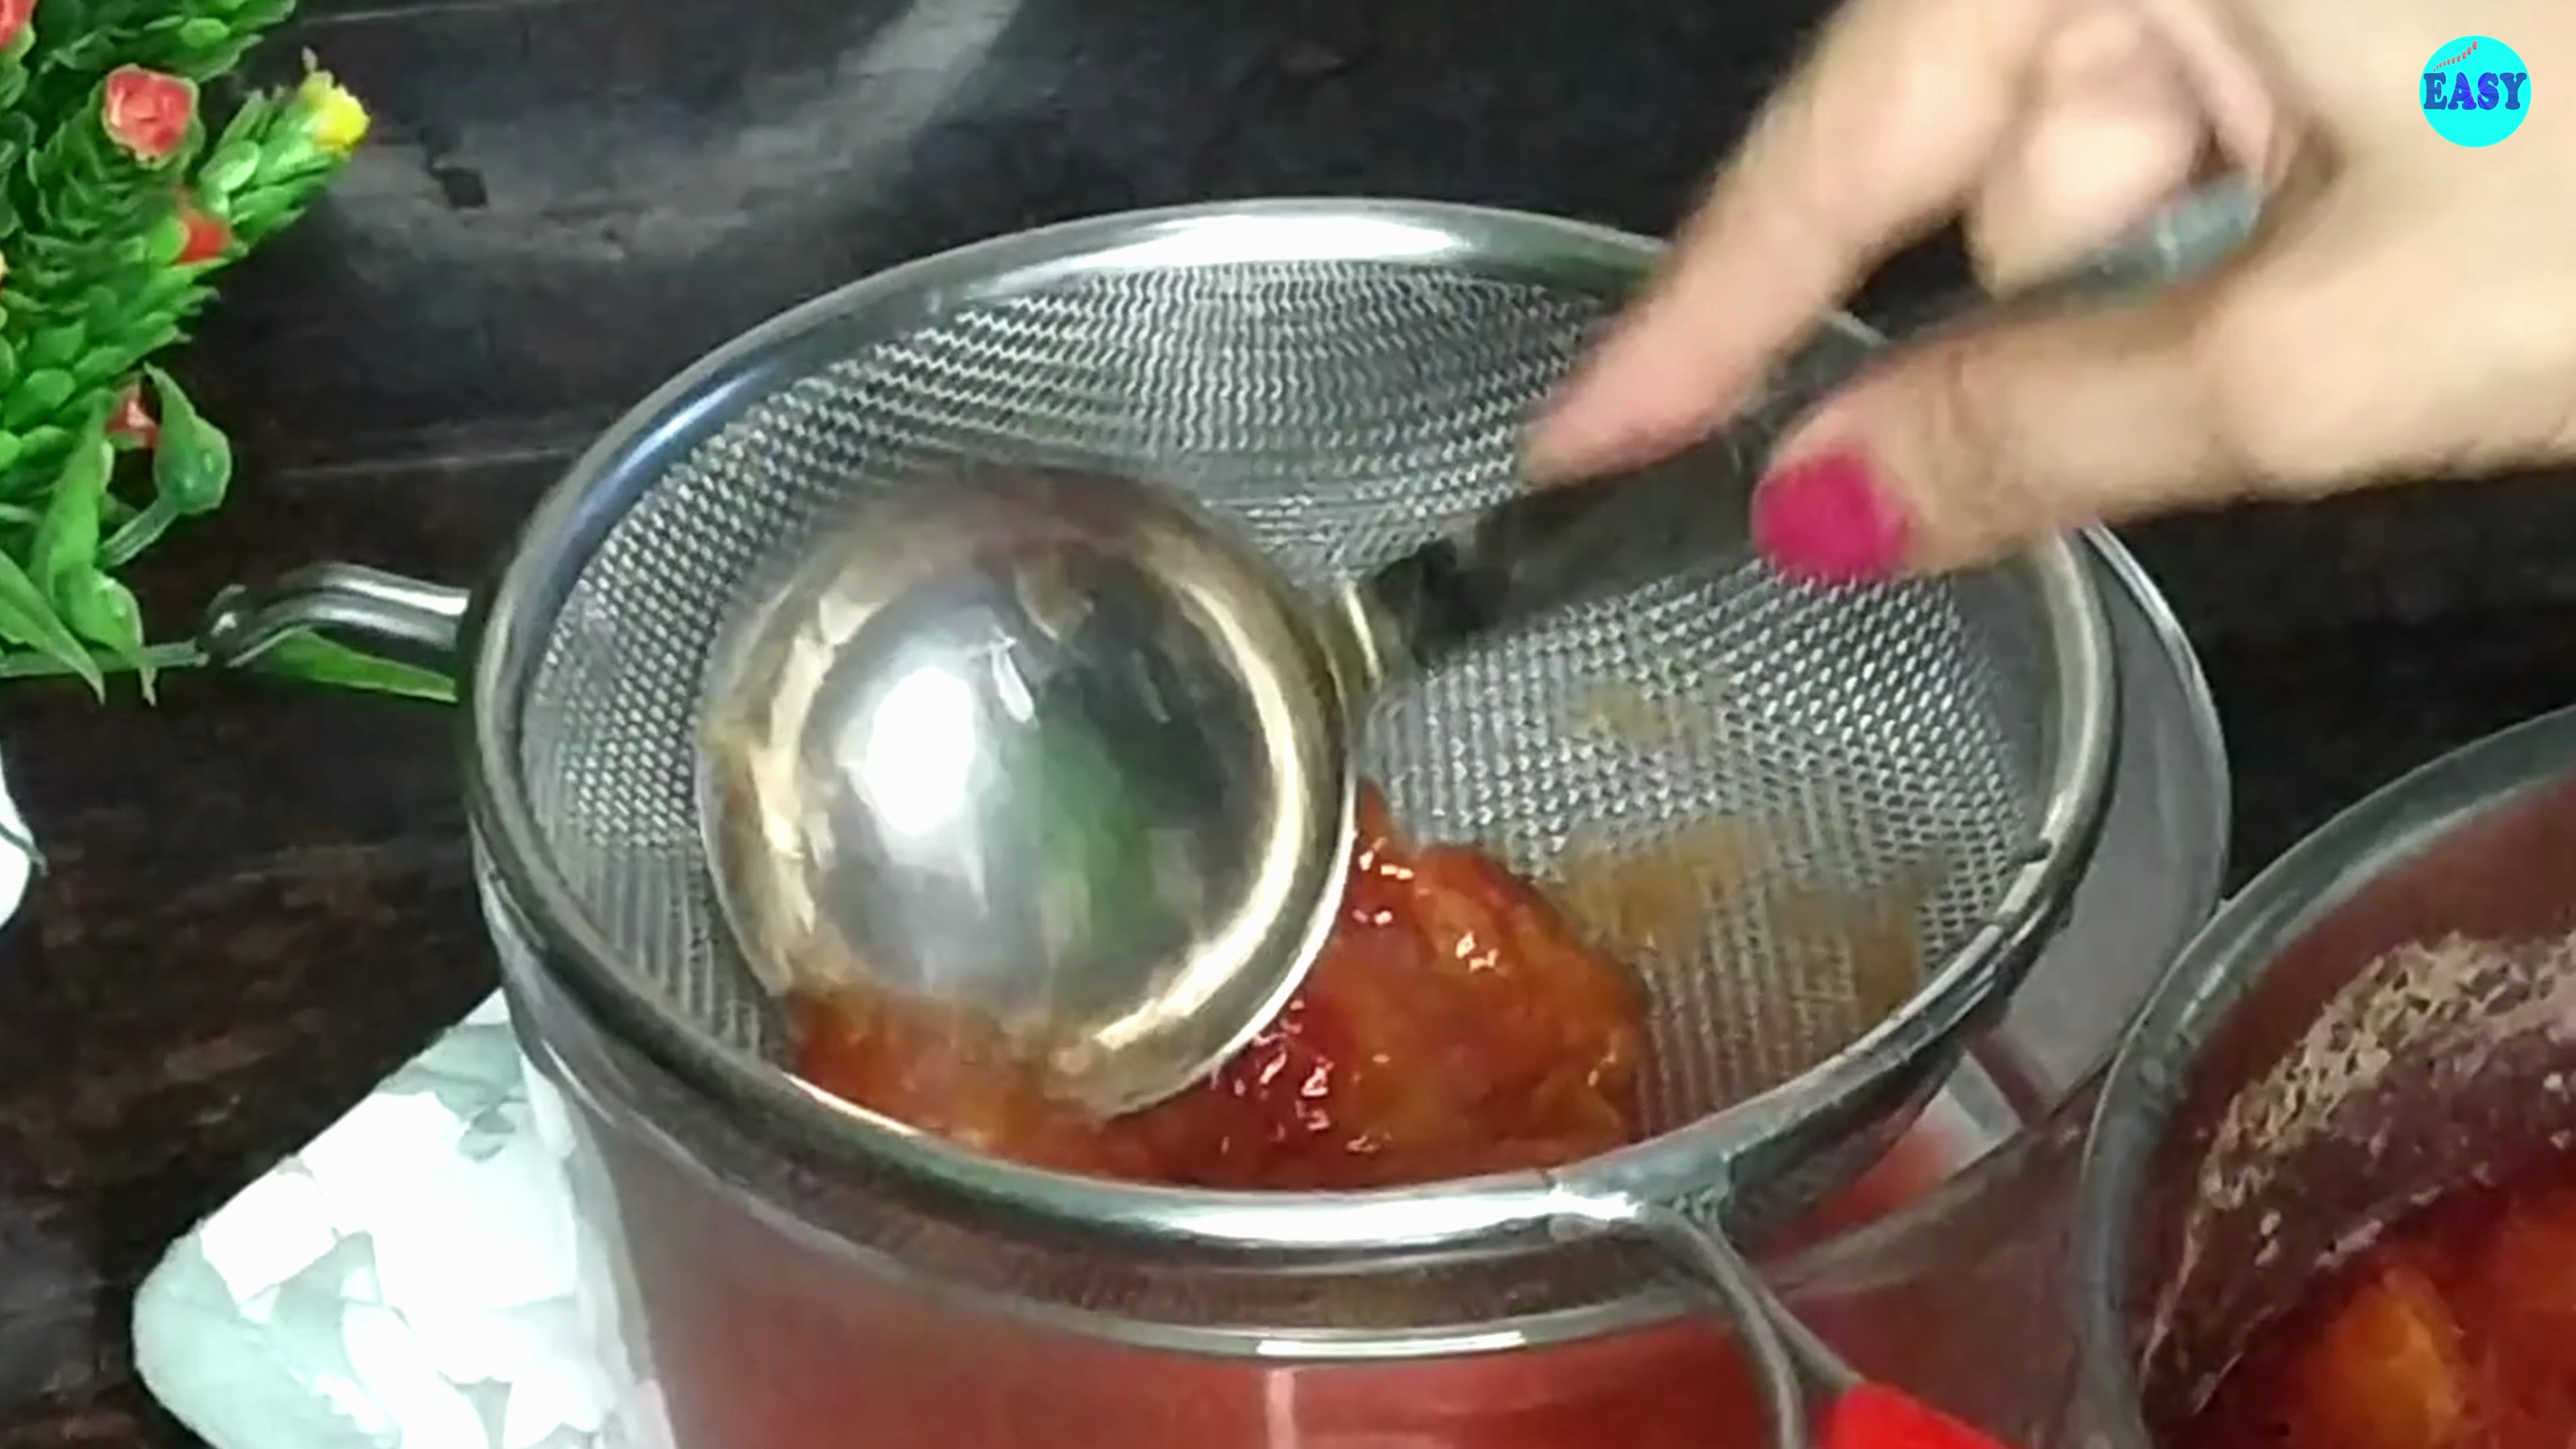 Step 5 - Pass the mixture through a sieve to separate the juice from the stones and peels.